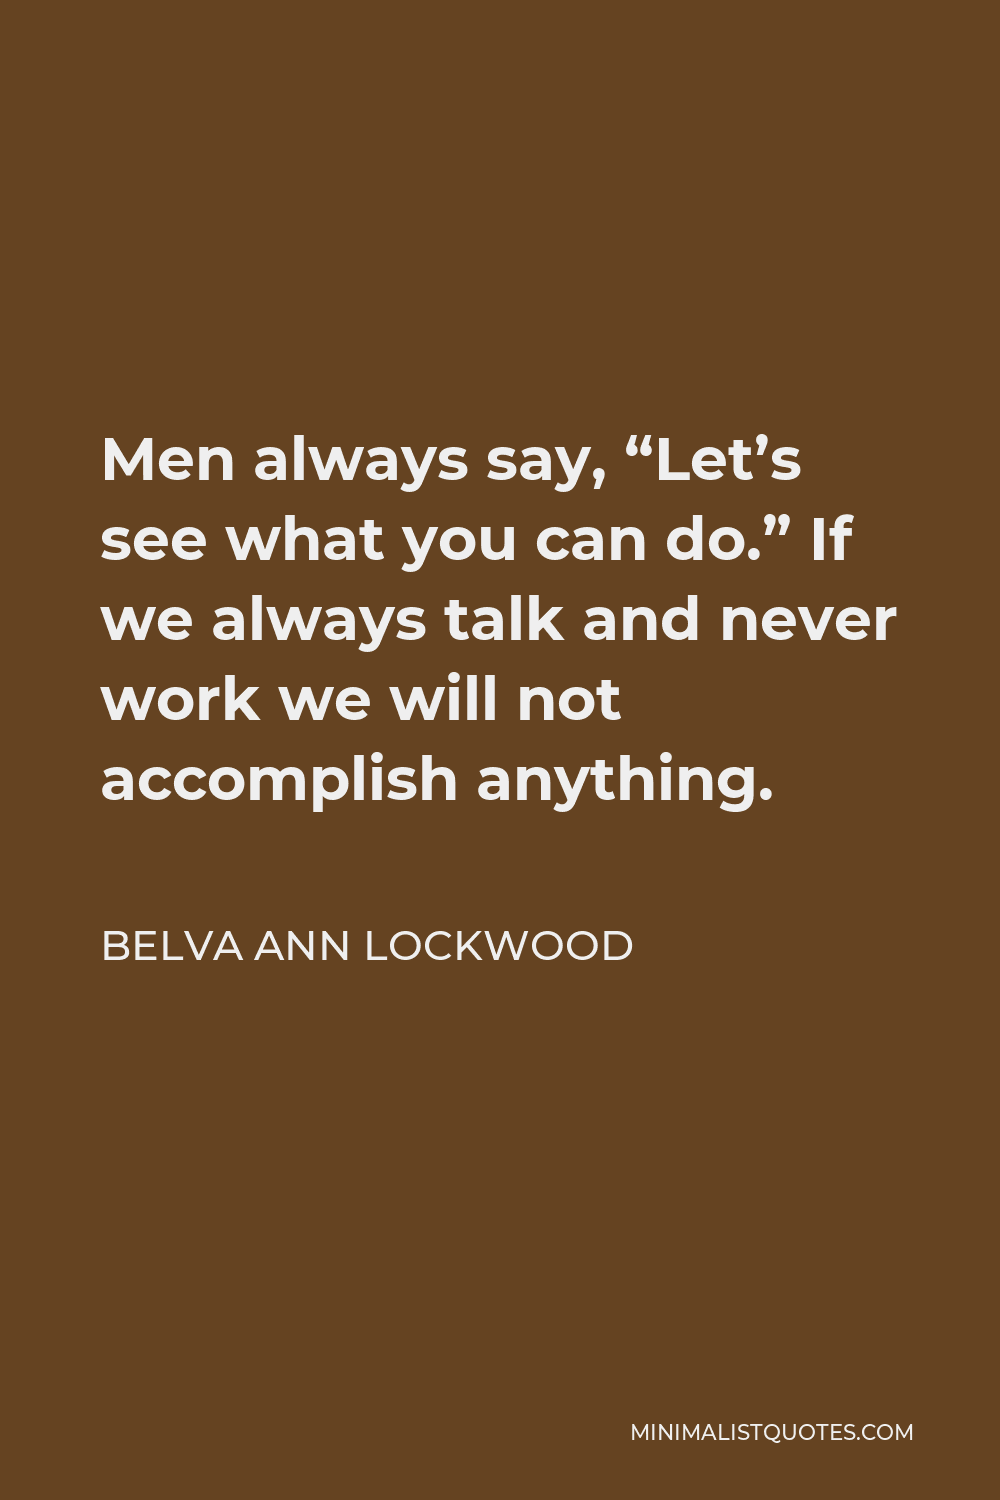 Belva Ann Lockwood Quote - Men always say, “Let’s see what you can do.” If we always talk and never work we will not accomplish anything.